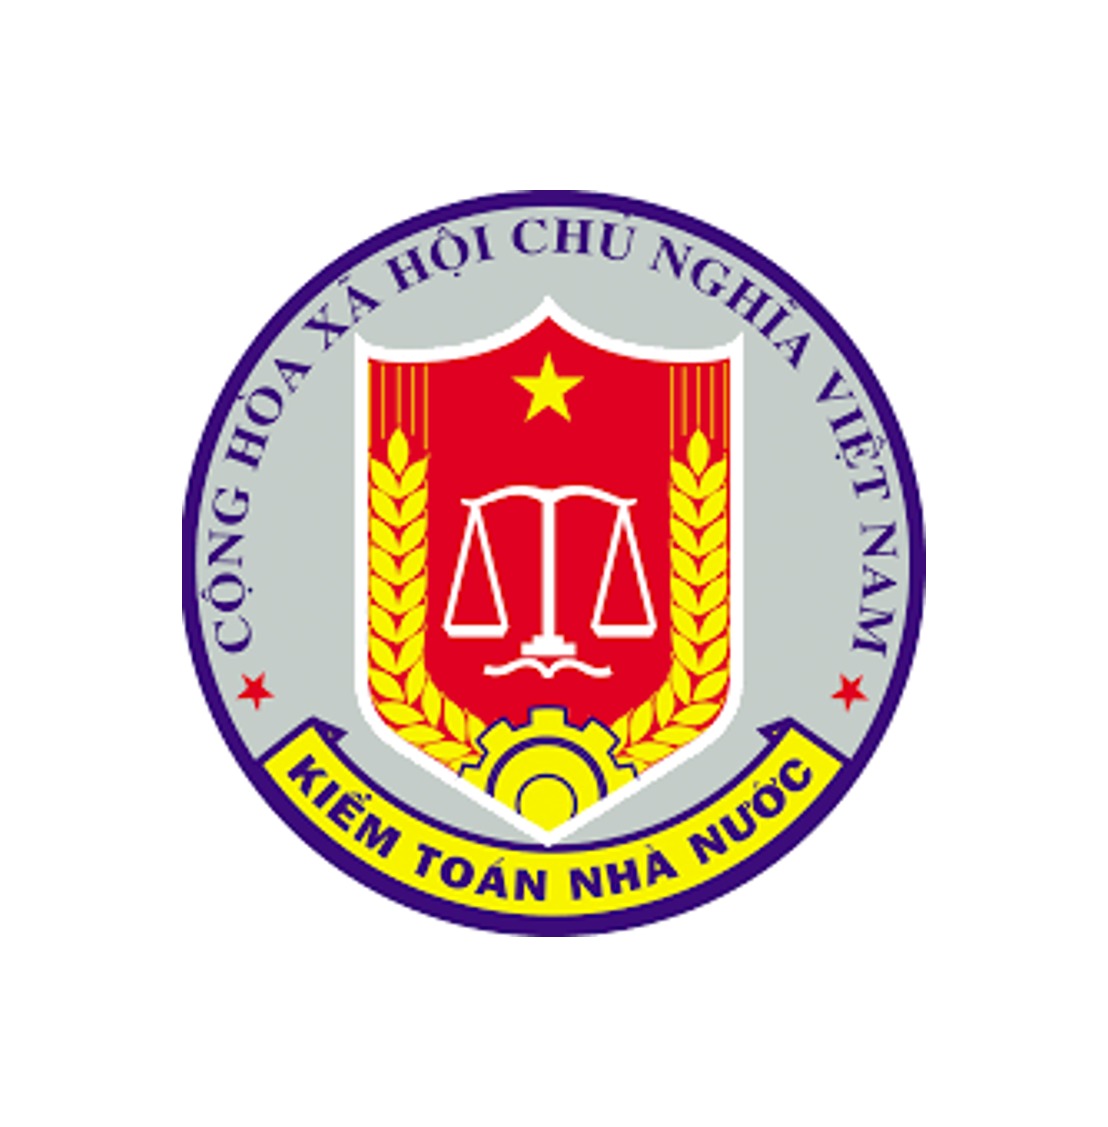 MINISTRY OF JUSTICE OF VIETNAM